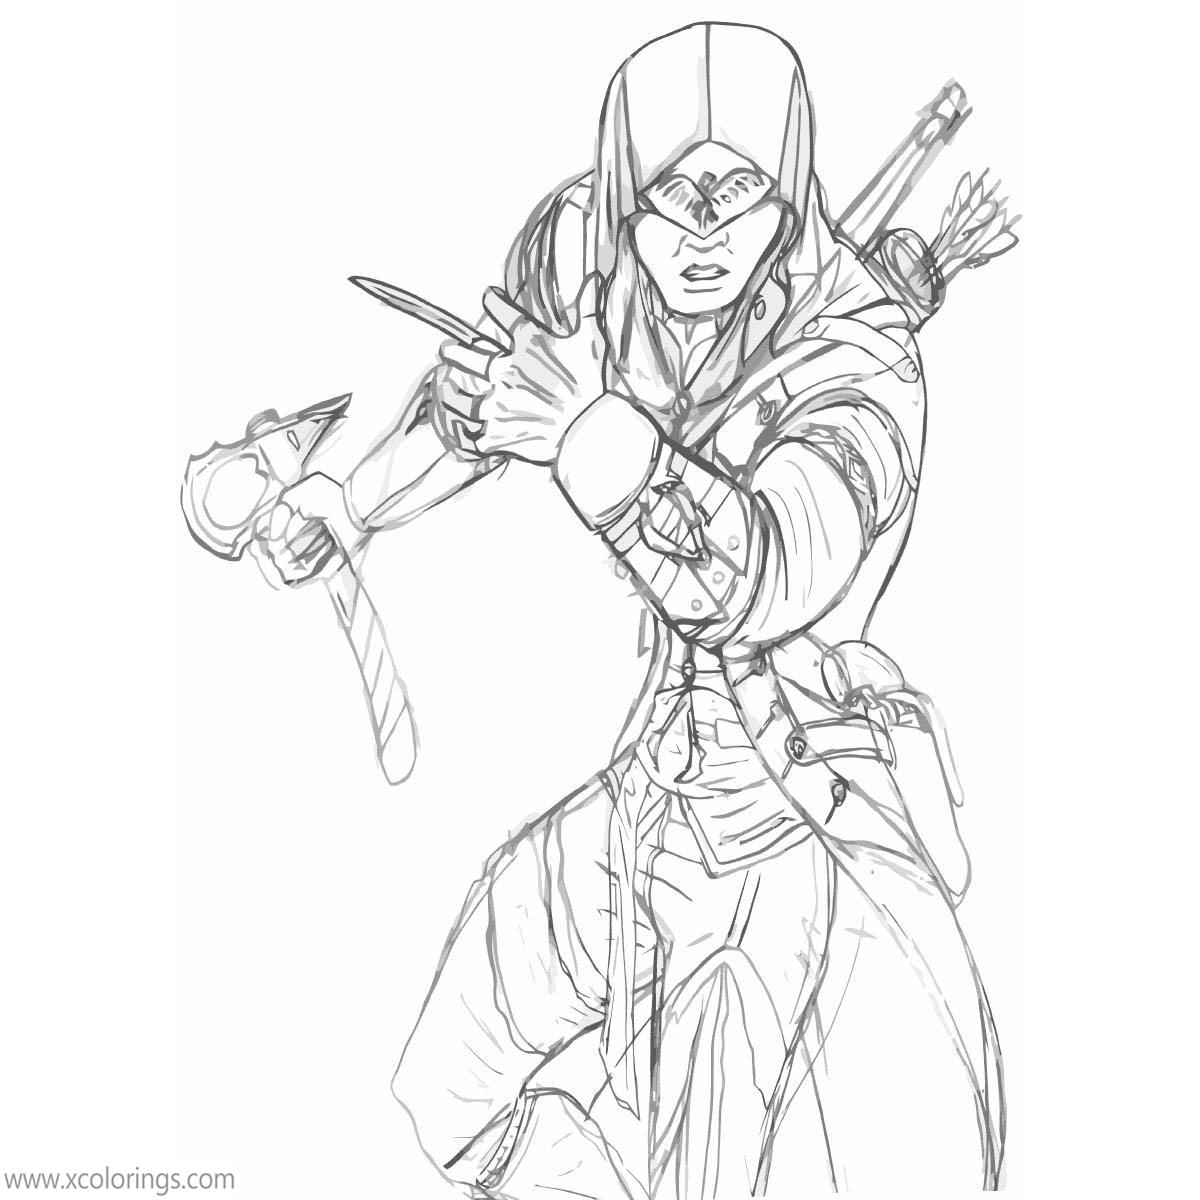 Free Connor from Assassin's Creed Coloring Pages printable